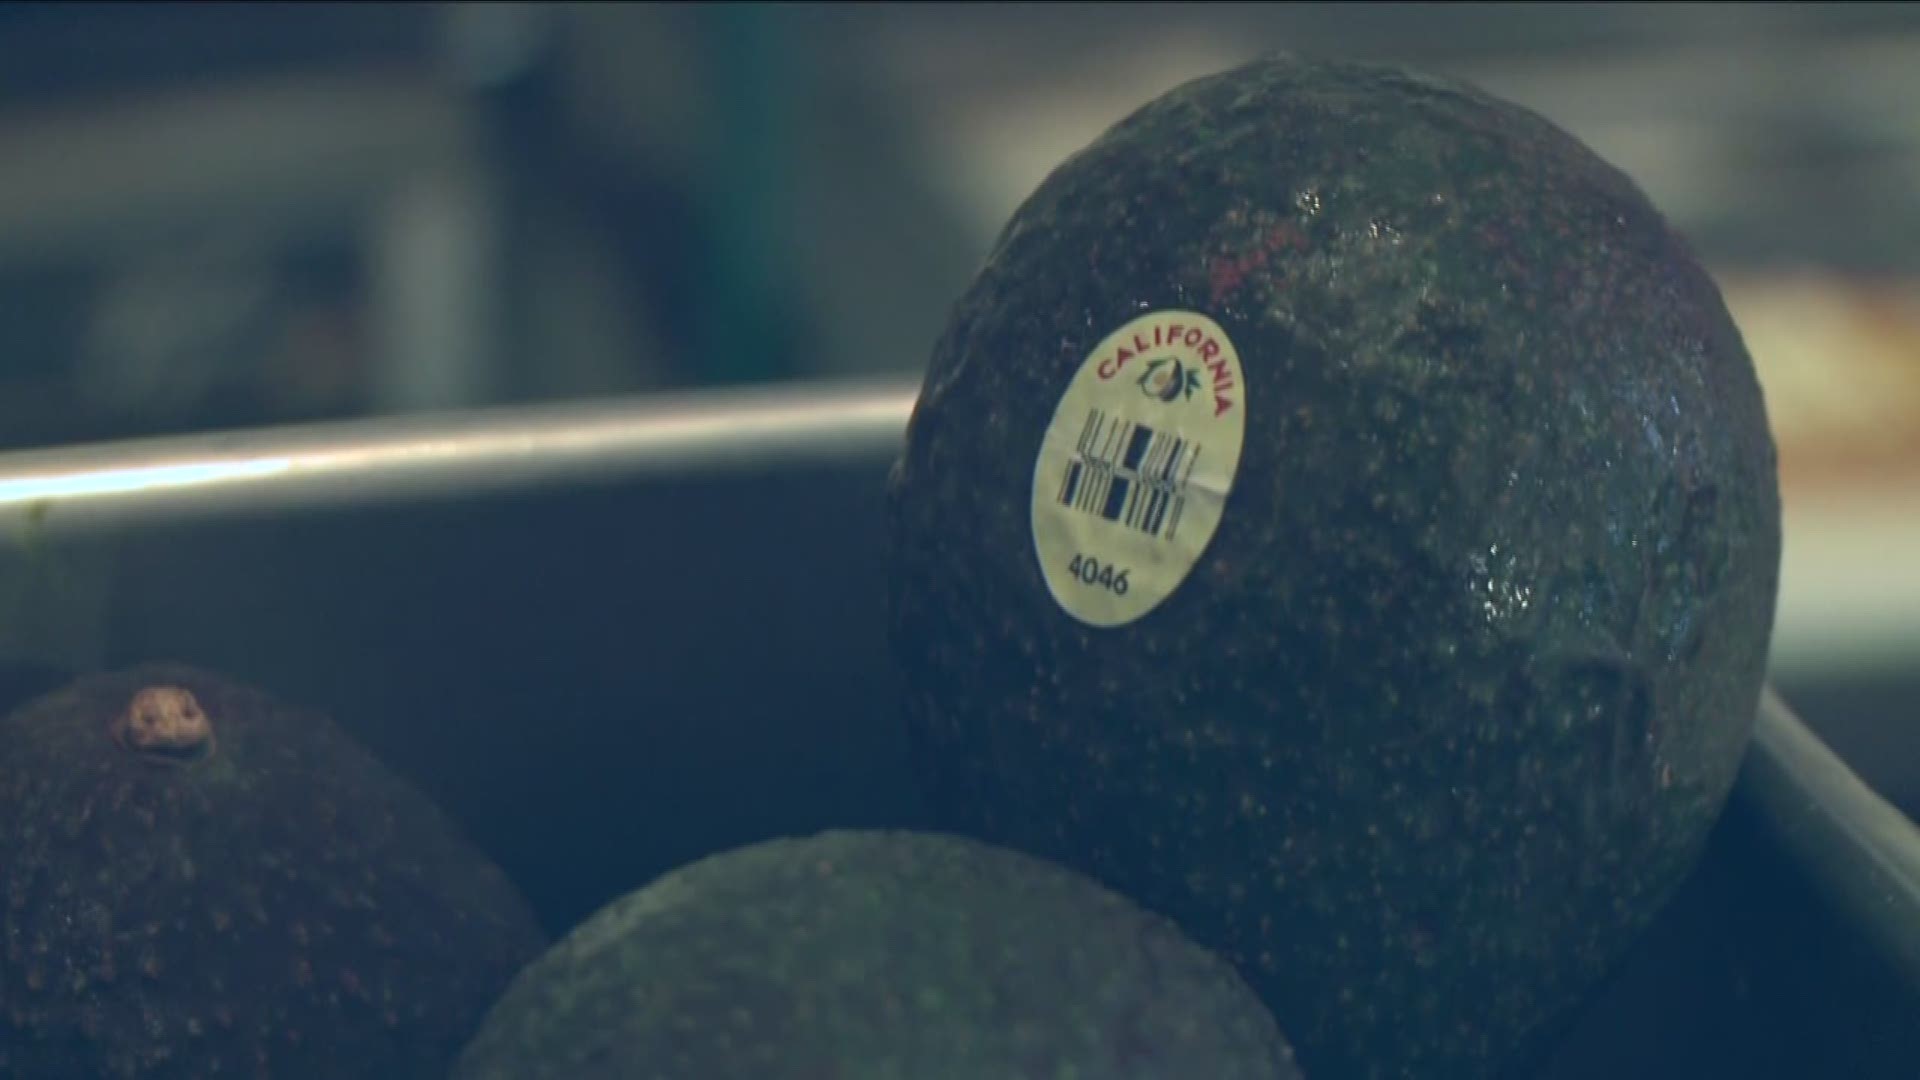 Are Californians getting rich off of growing avocados? ABC10's Gabrielle Karol went to find out.